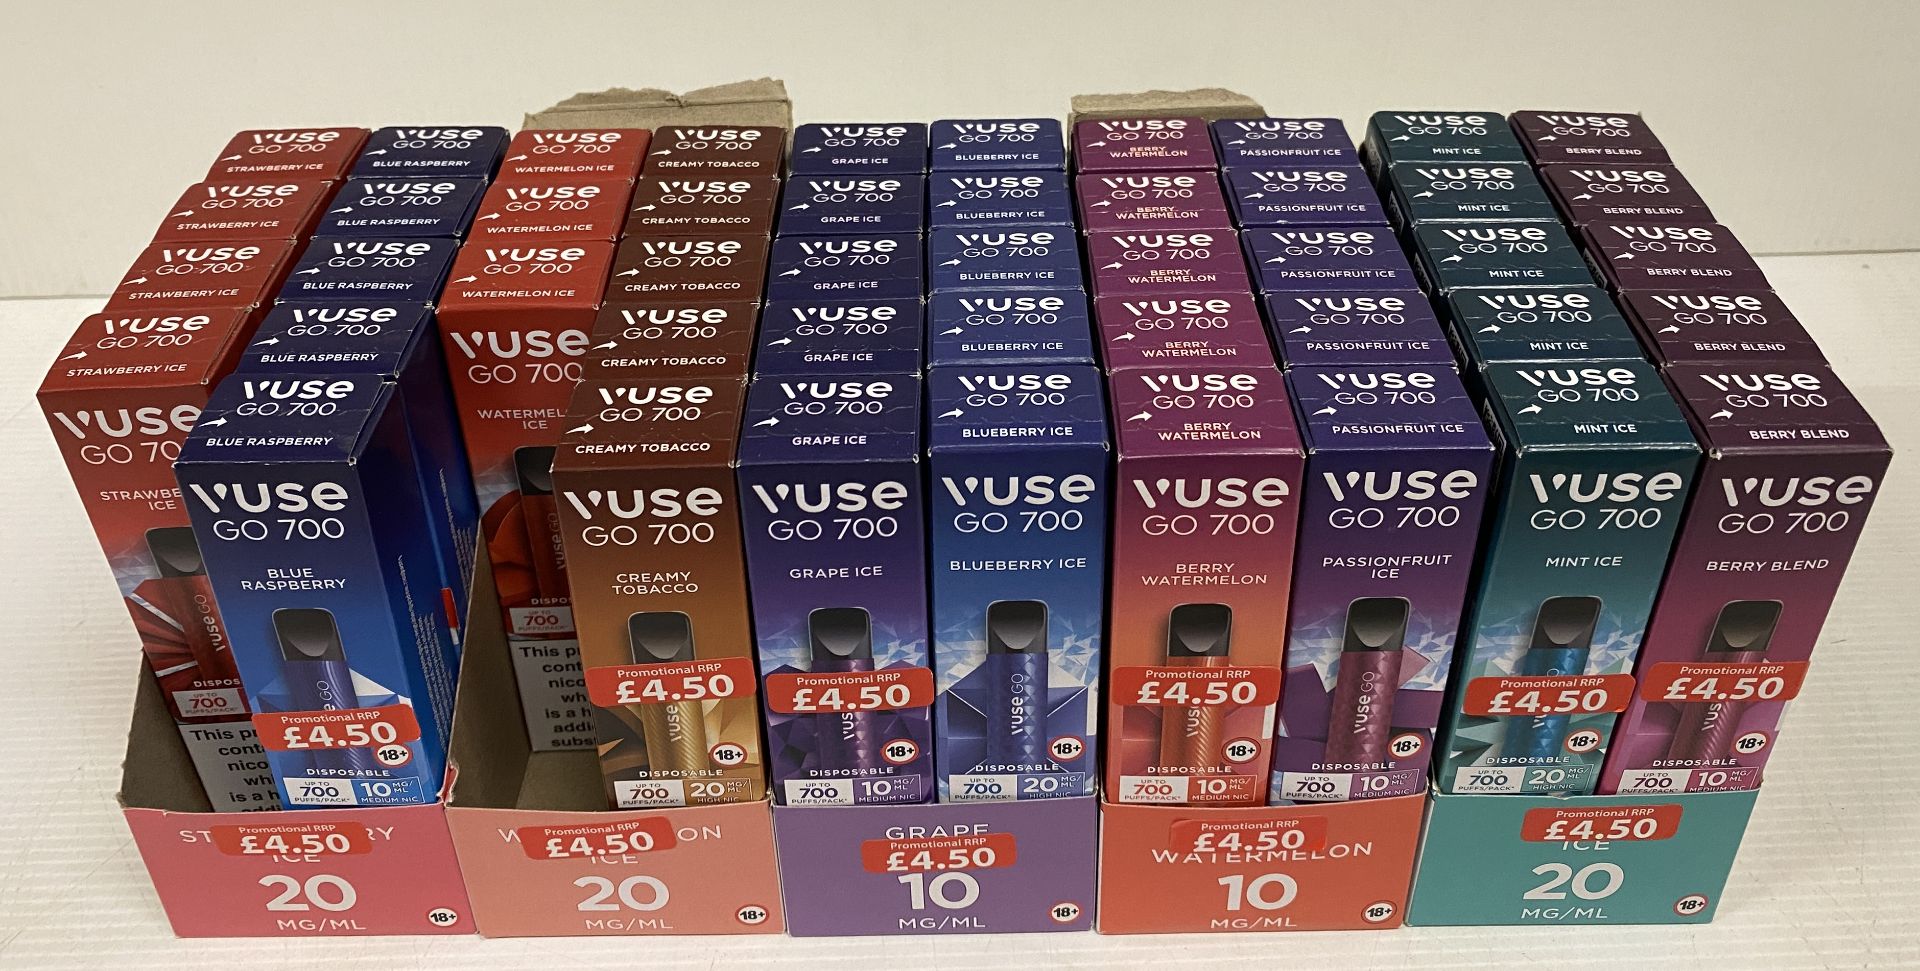 47 x packs of VUSE GO 700 - Assorted flavours and nicotine mg/ml - (Saleroom Location F07)